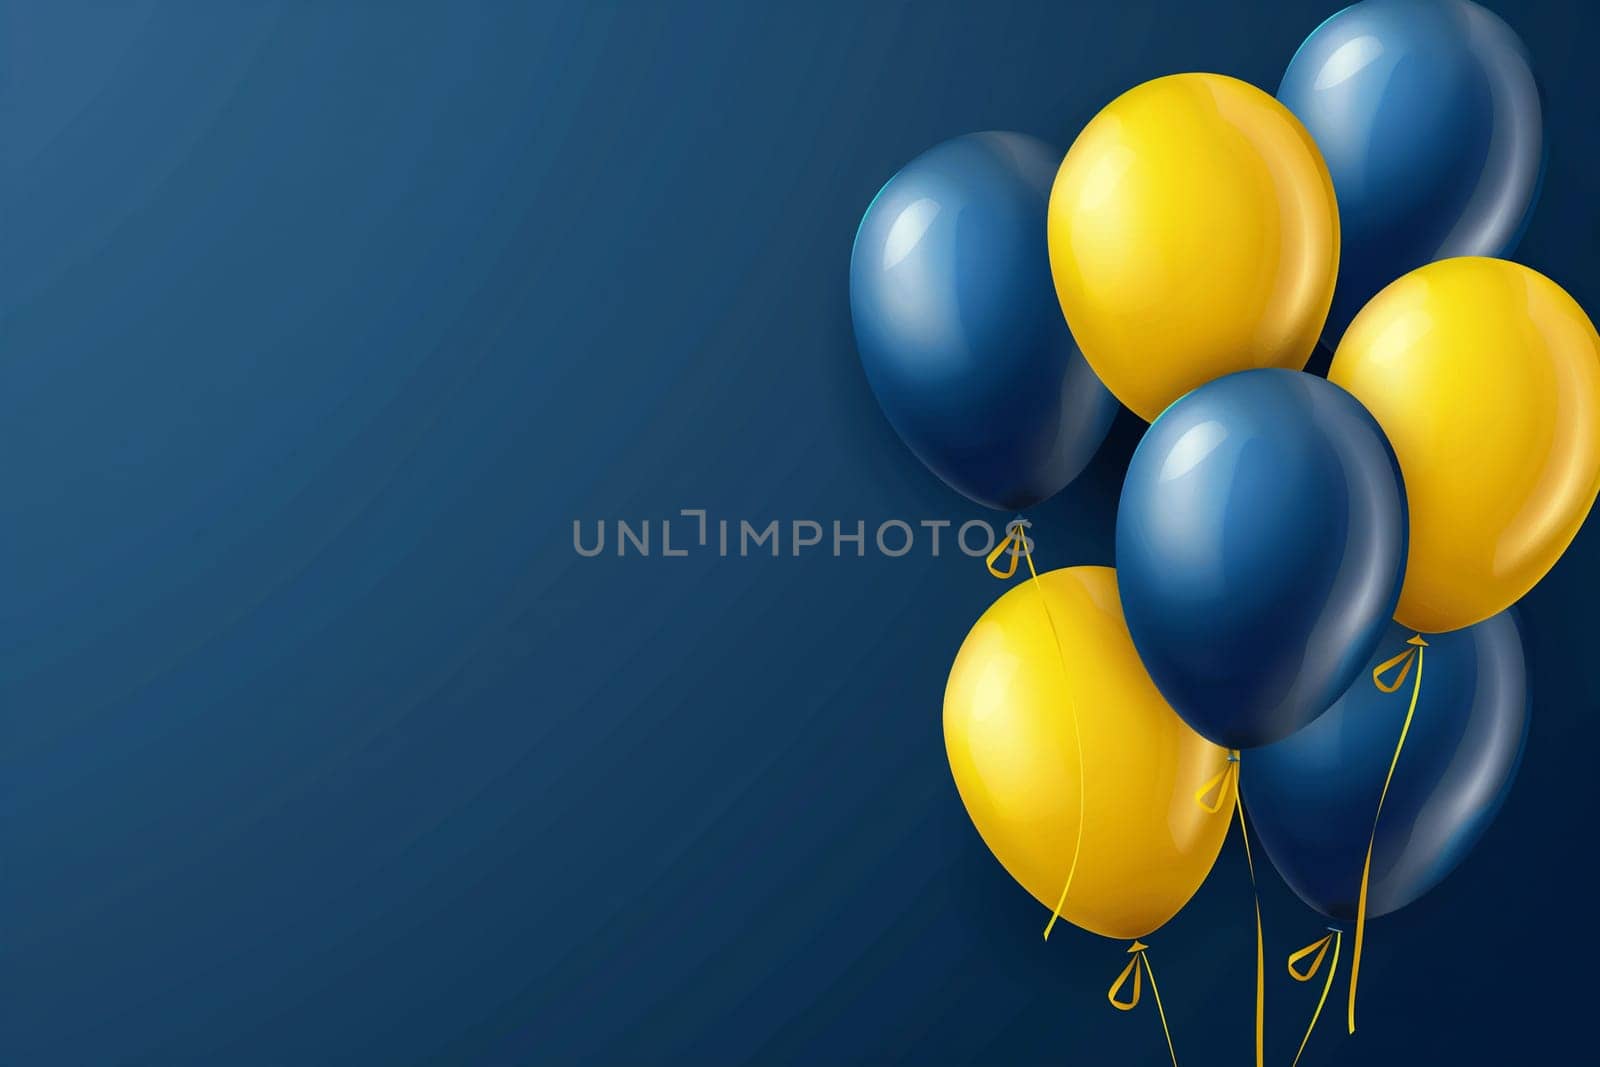 Blue and yellow balloons stand out against a blue background, creating a vibrant and joyful atmosphere.